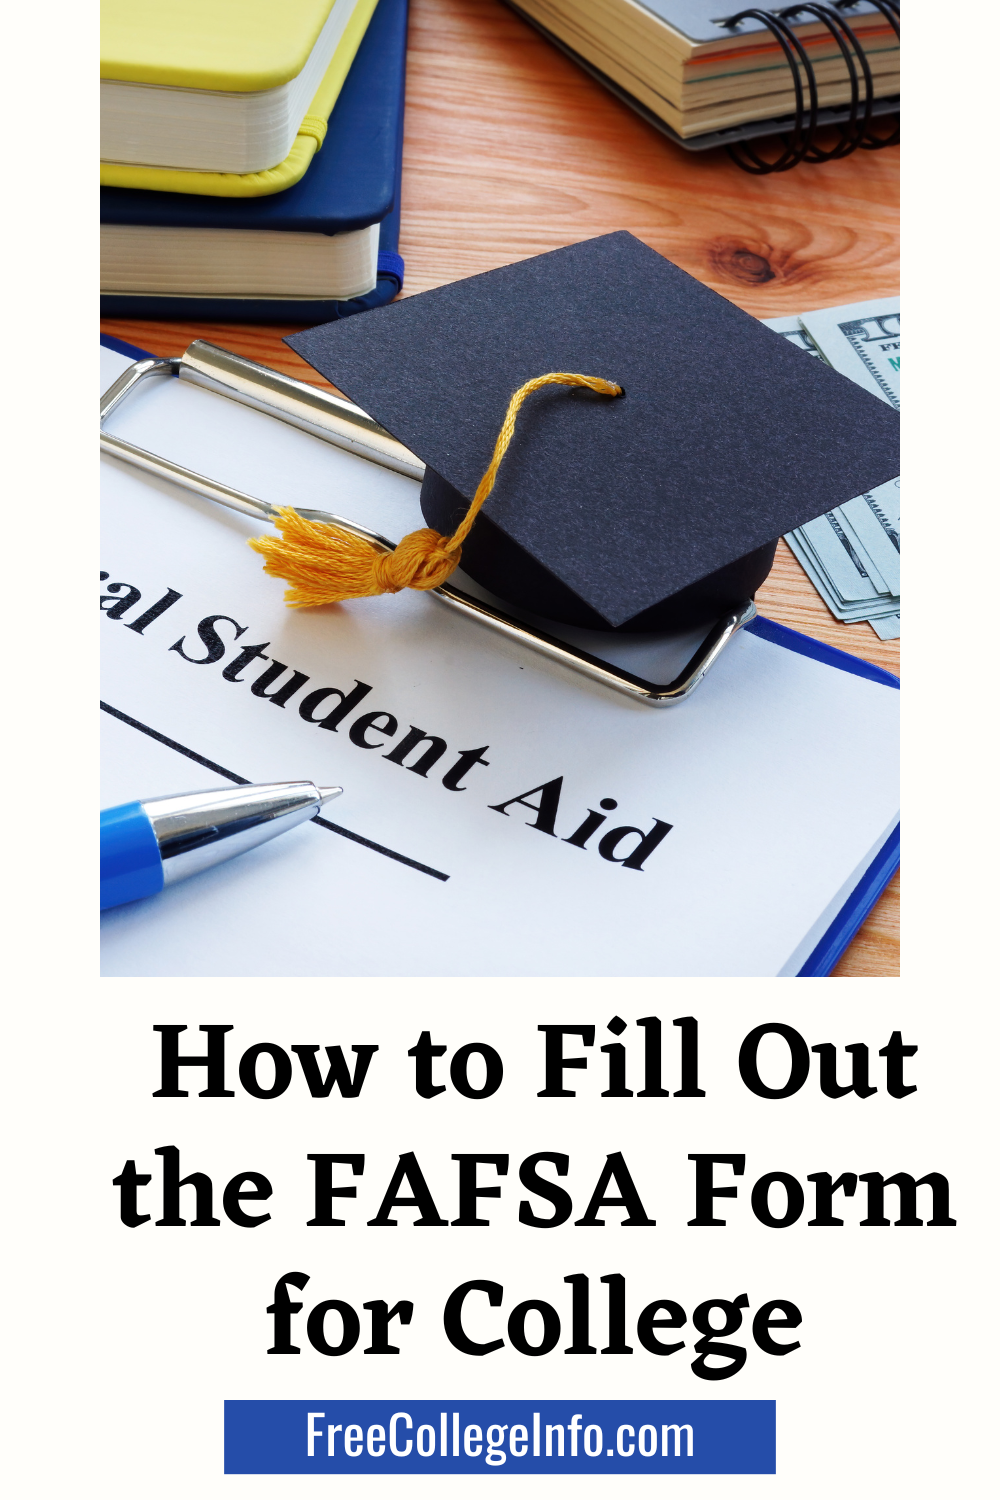 How to Fill Out the FAFSA Form for College